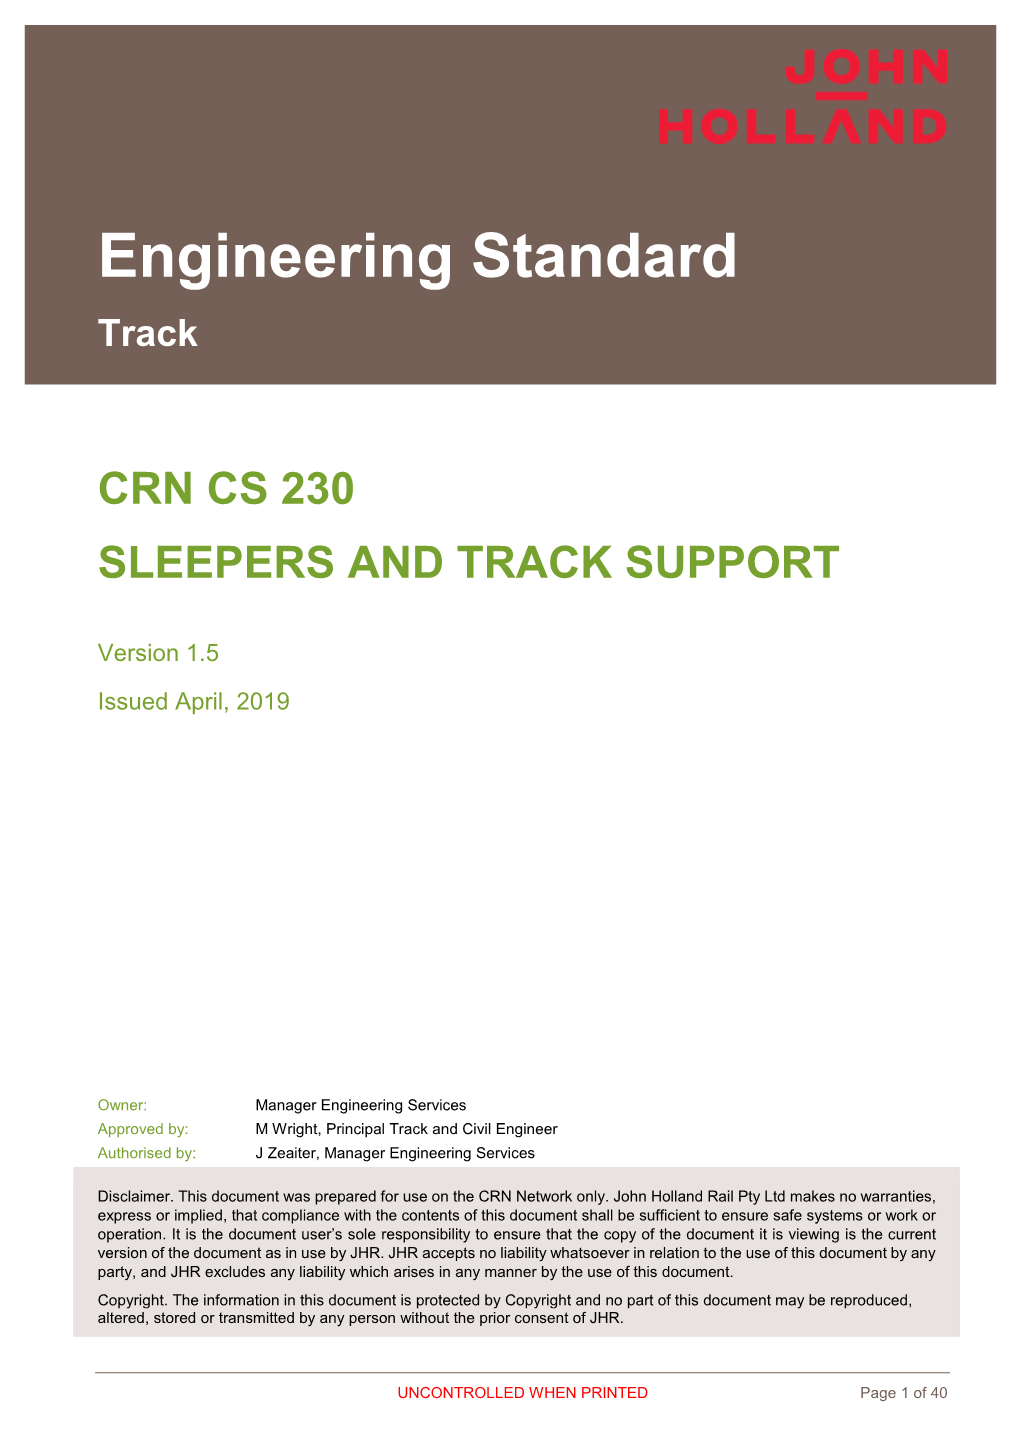 Sleepers & Track Support